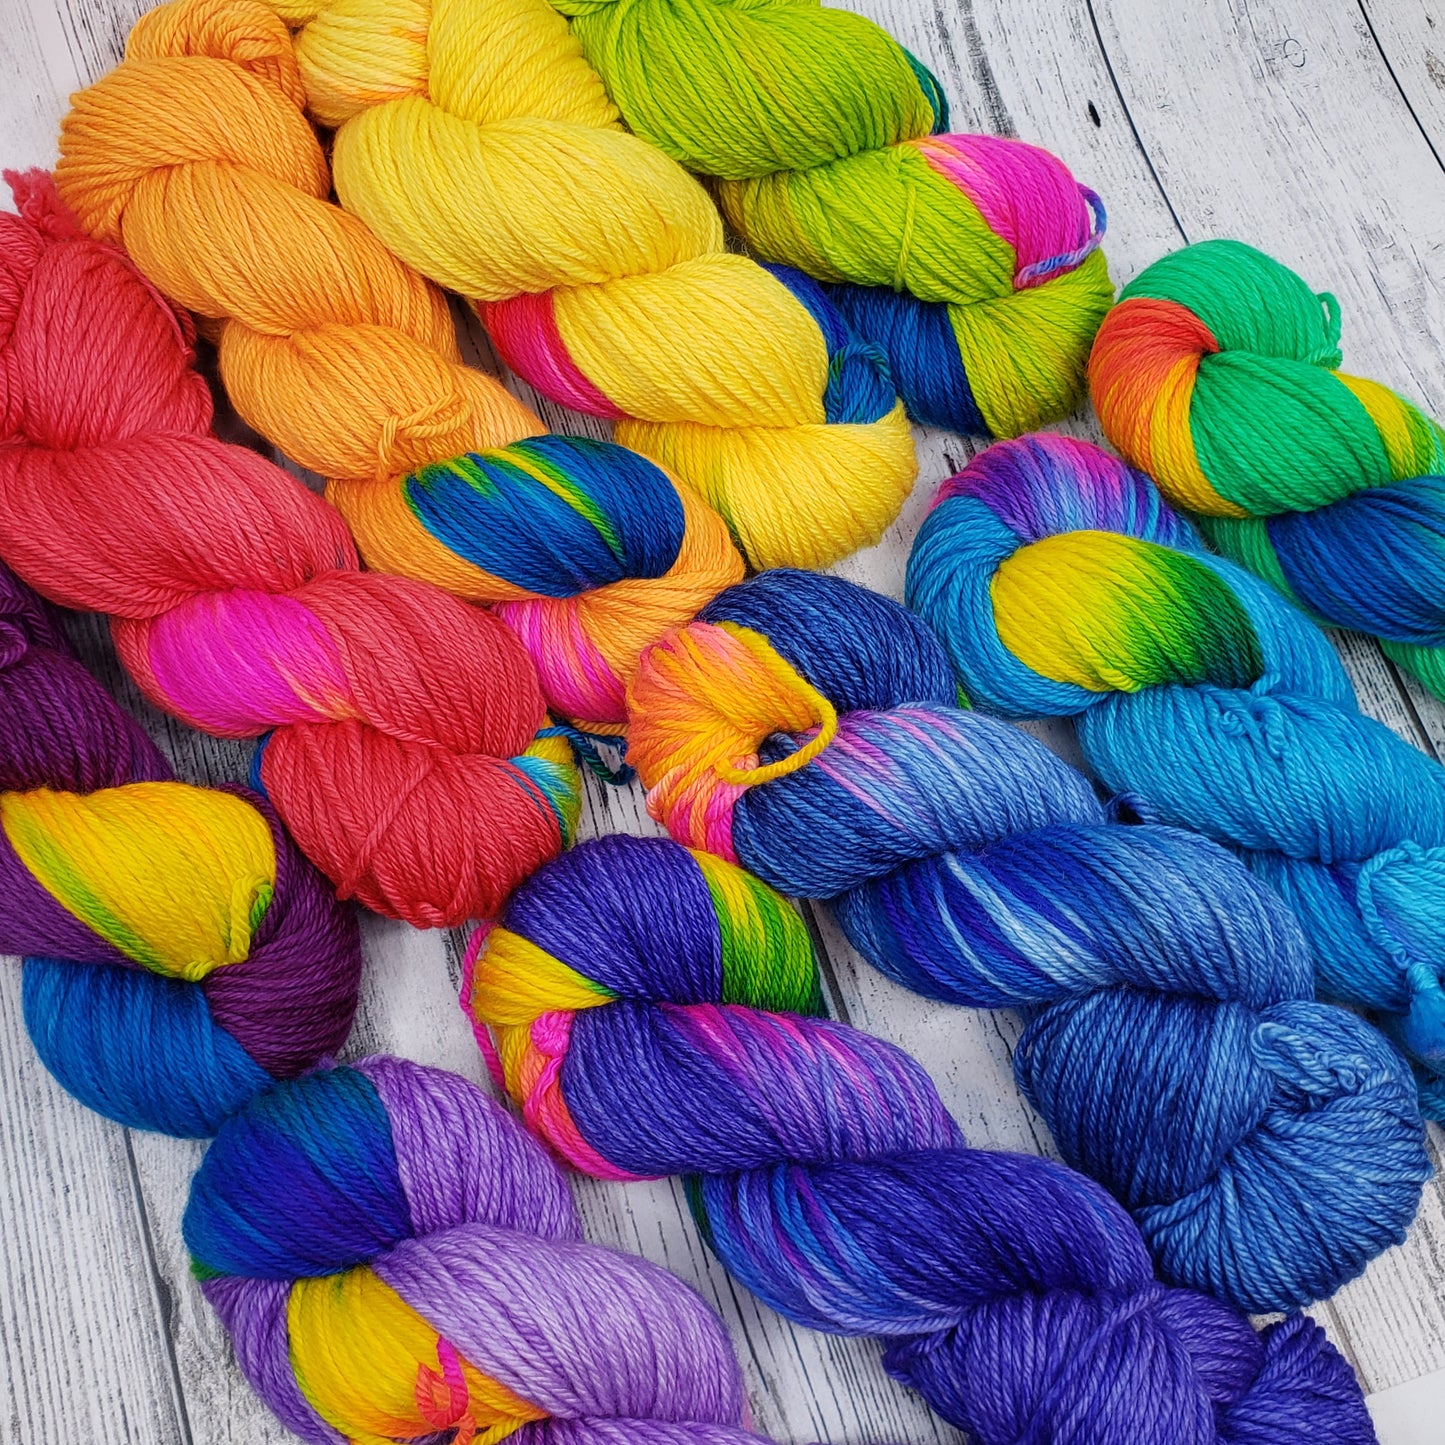 Why Yes, We do LOVE Rainbows - Full Skein Sets